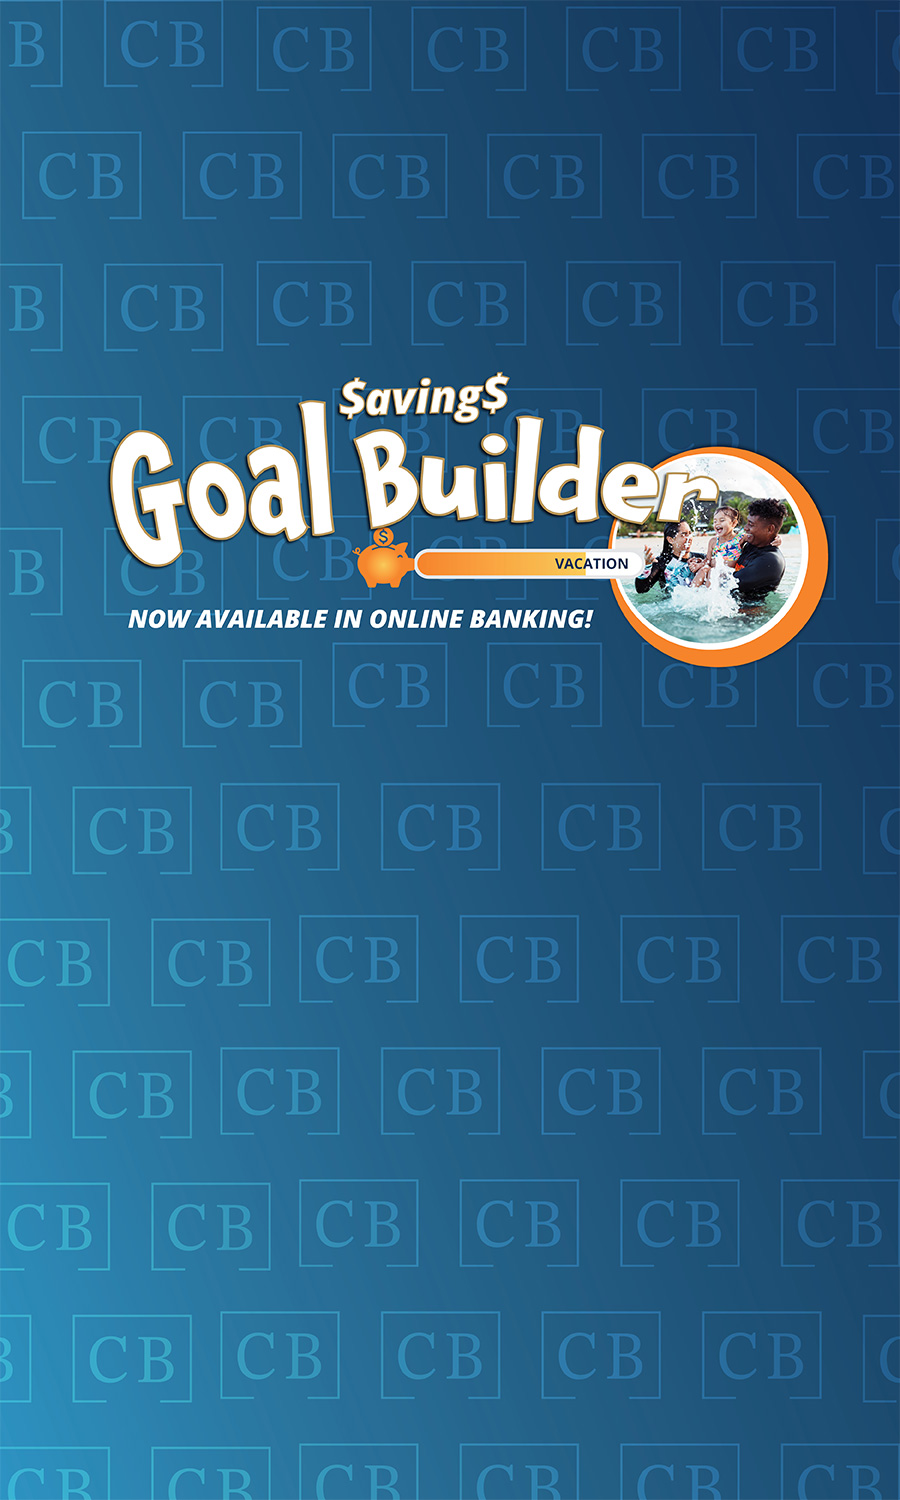 Savings Goal Builder by Central Bank